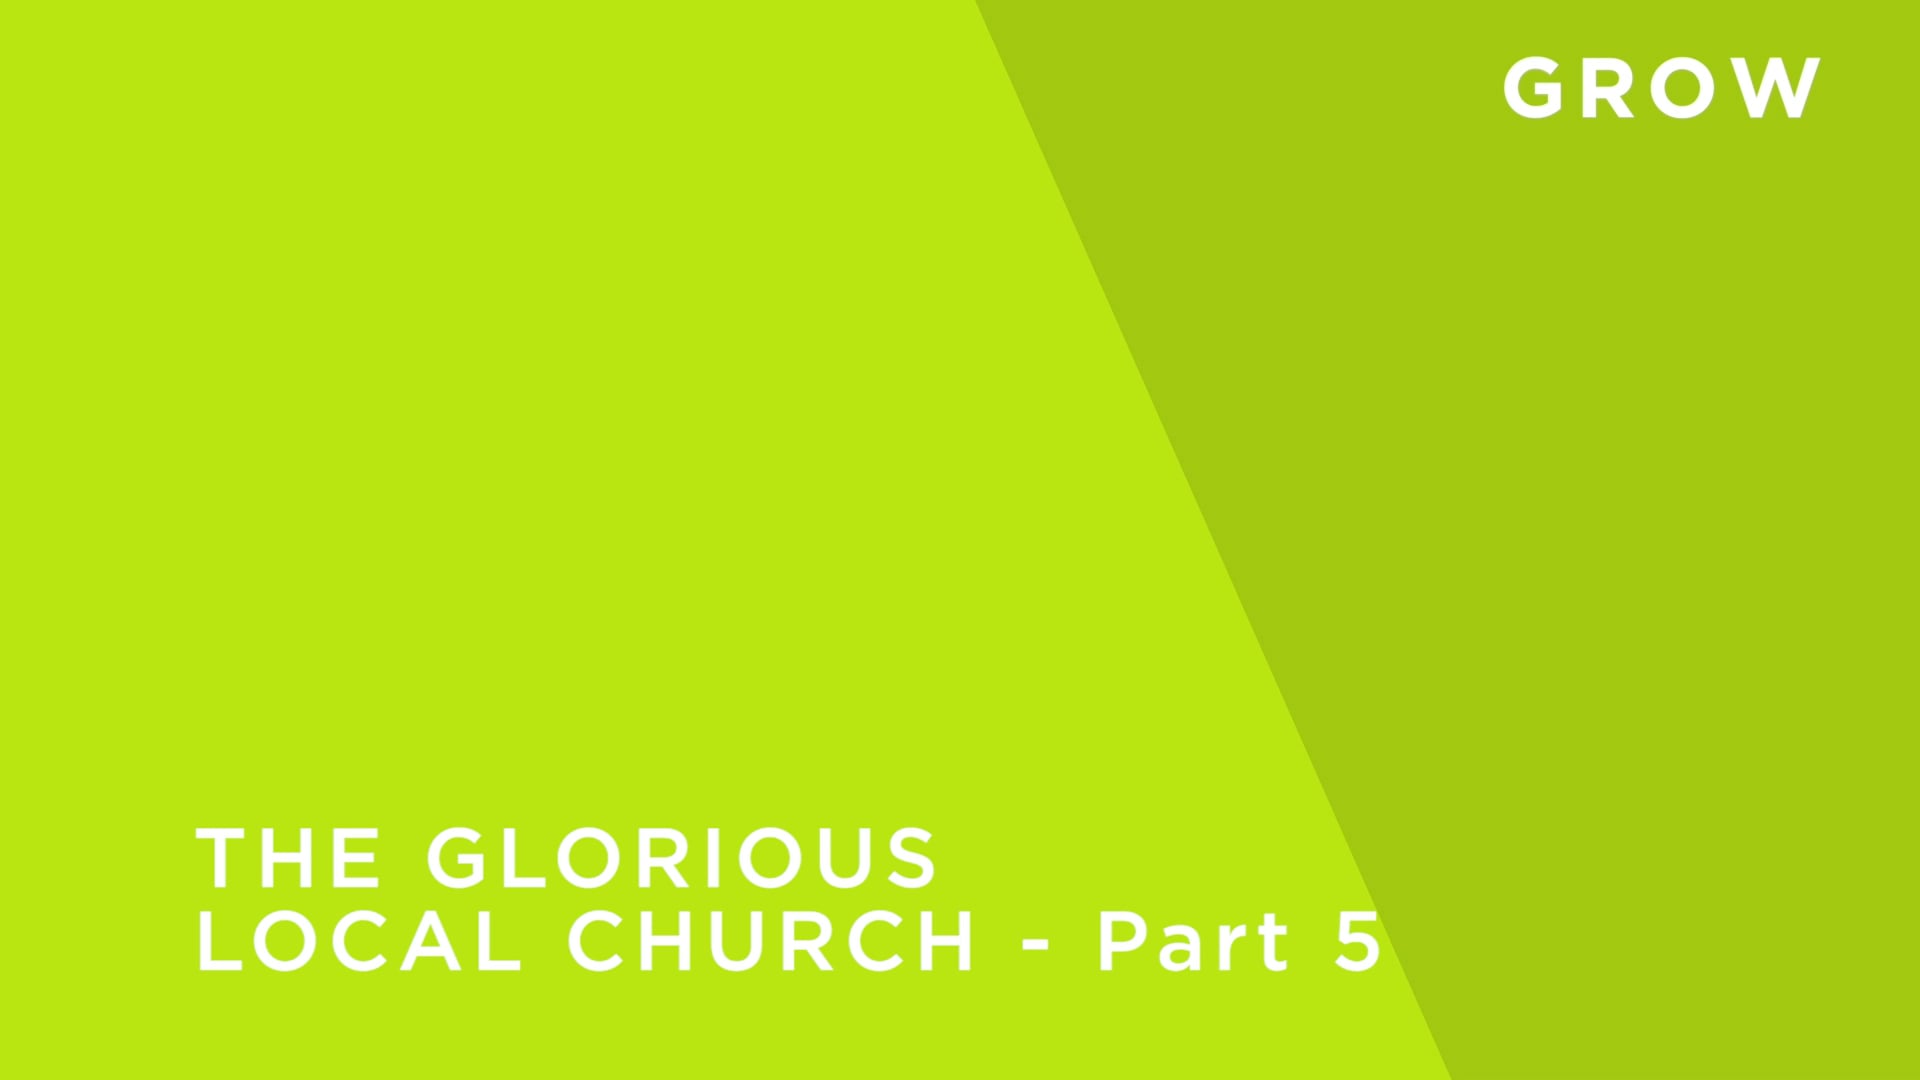 The Glorious Local Church - Part 5 - WHO LEADS